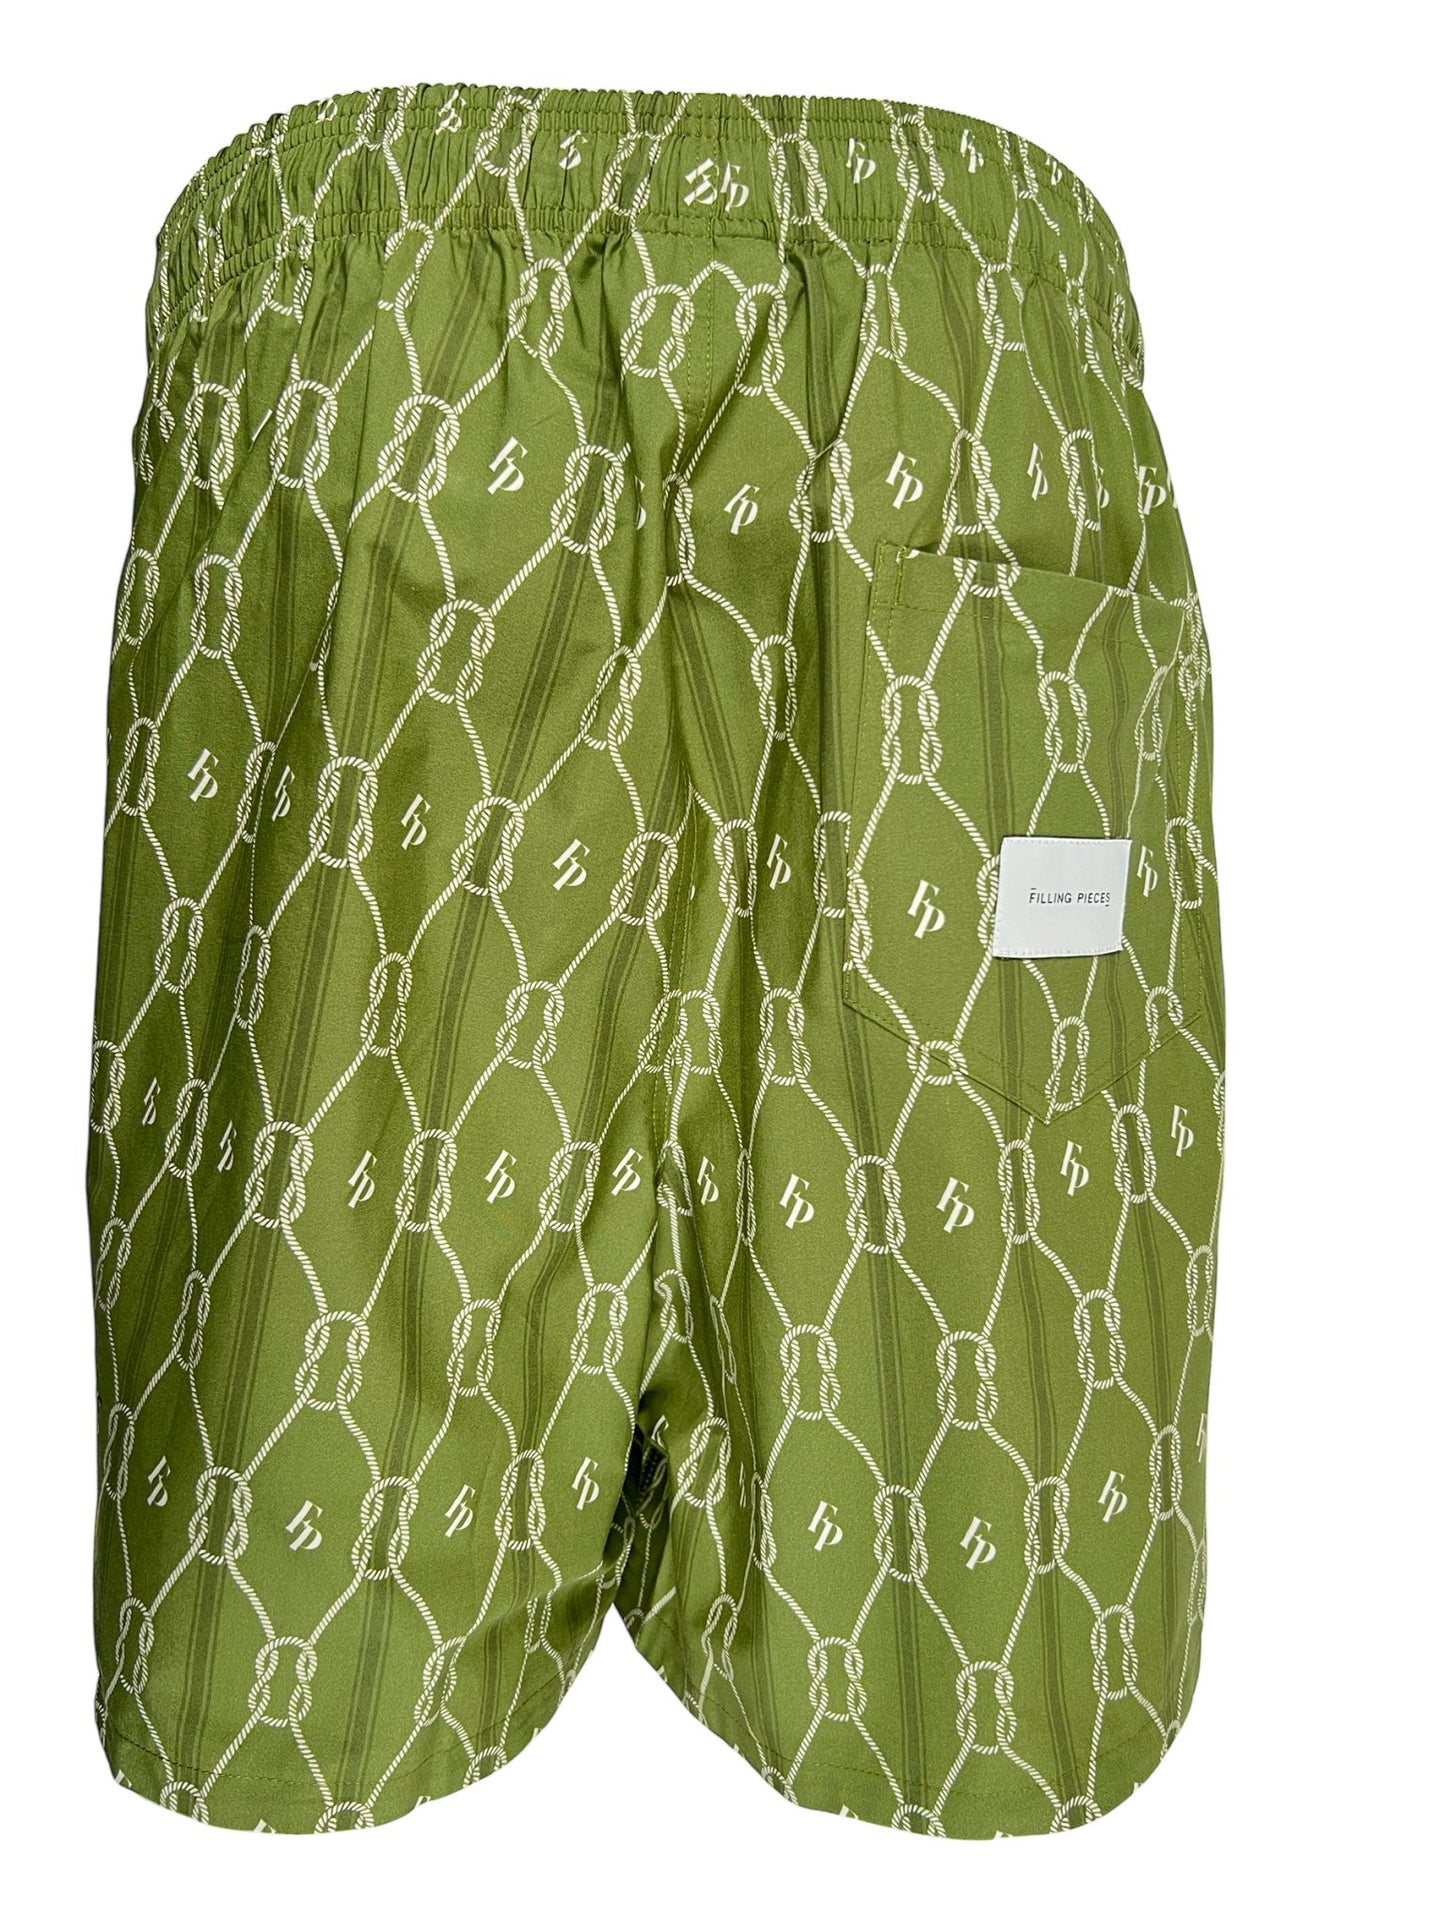 Filling Pieces olive green swim shorts with a white chain-link all-over print and a visible brand label.